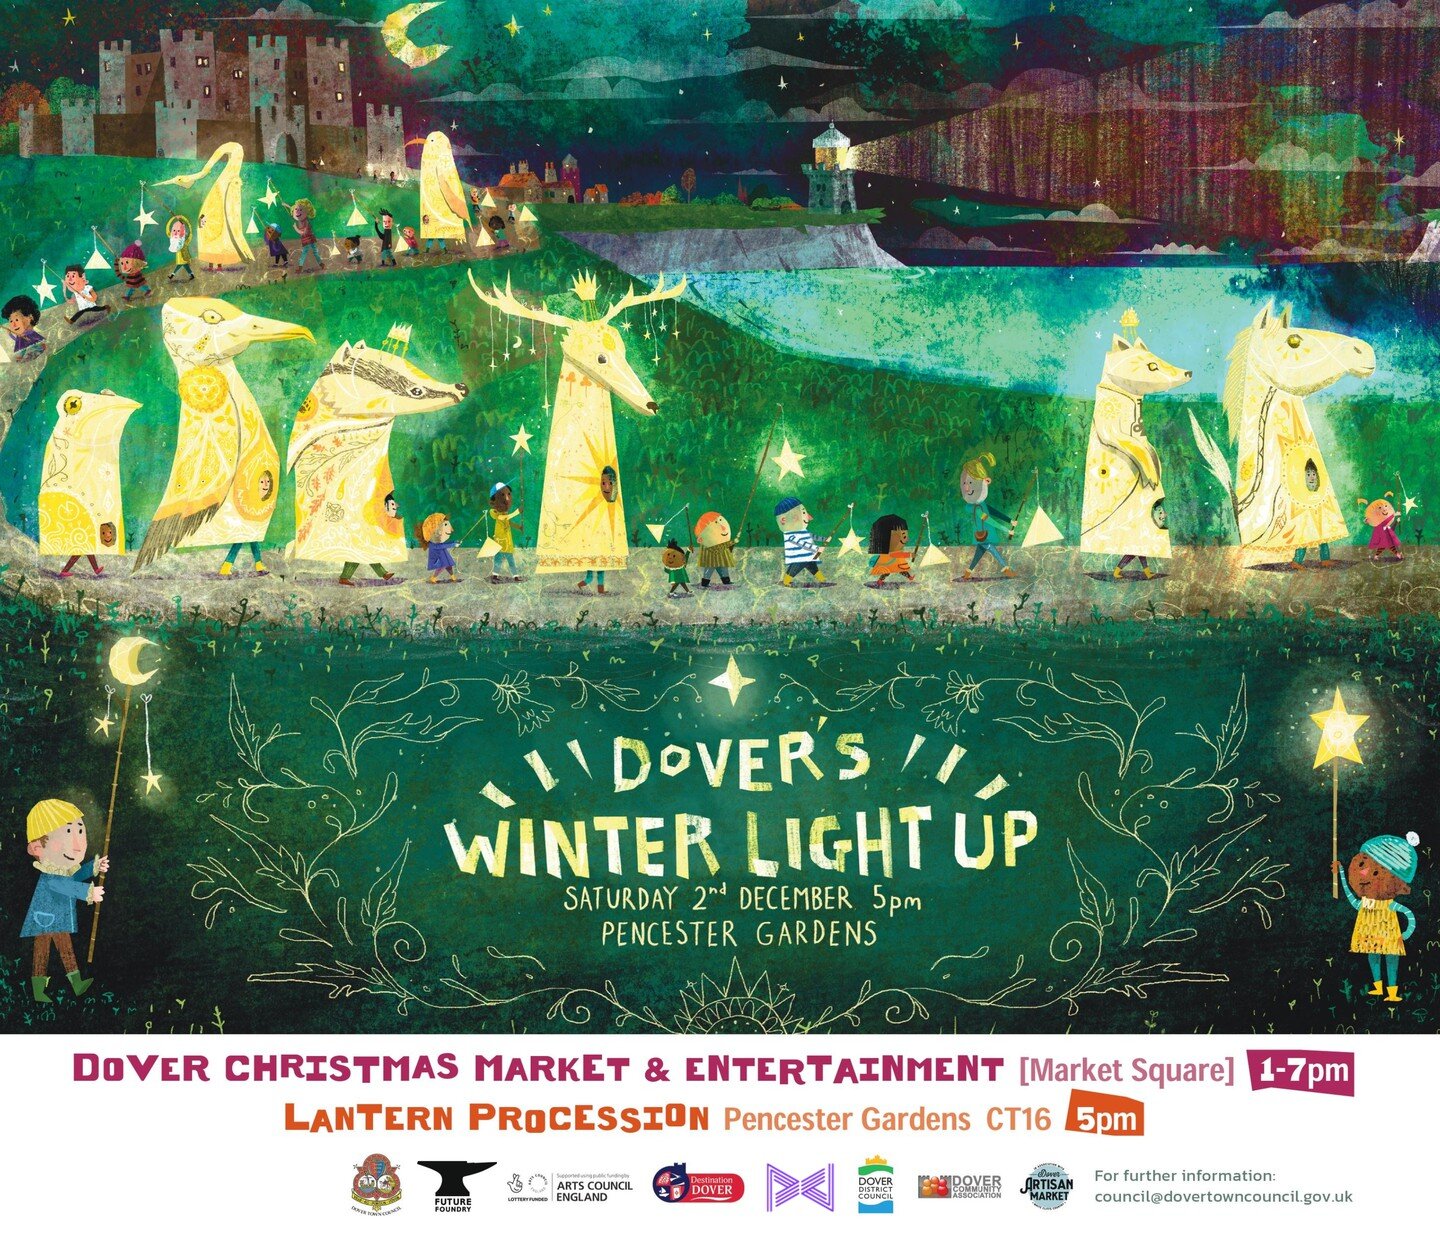 DOVER WINTER LIGHT UP 
Sat 2nd Dec 2023
1pm-7pm

🎉Getting super excited for this event!🎉Lots going on and not to miss. Please share to friends and family. Massive thanks to co-hosts @future_foundry and all the other partners, organisations, busines